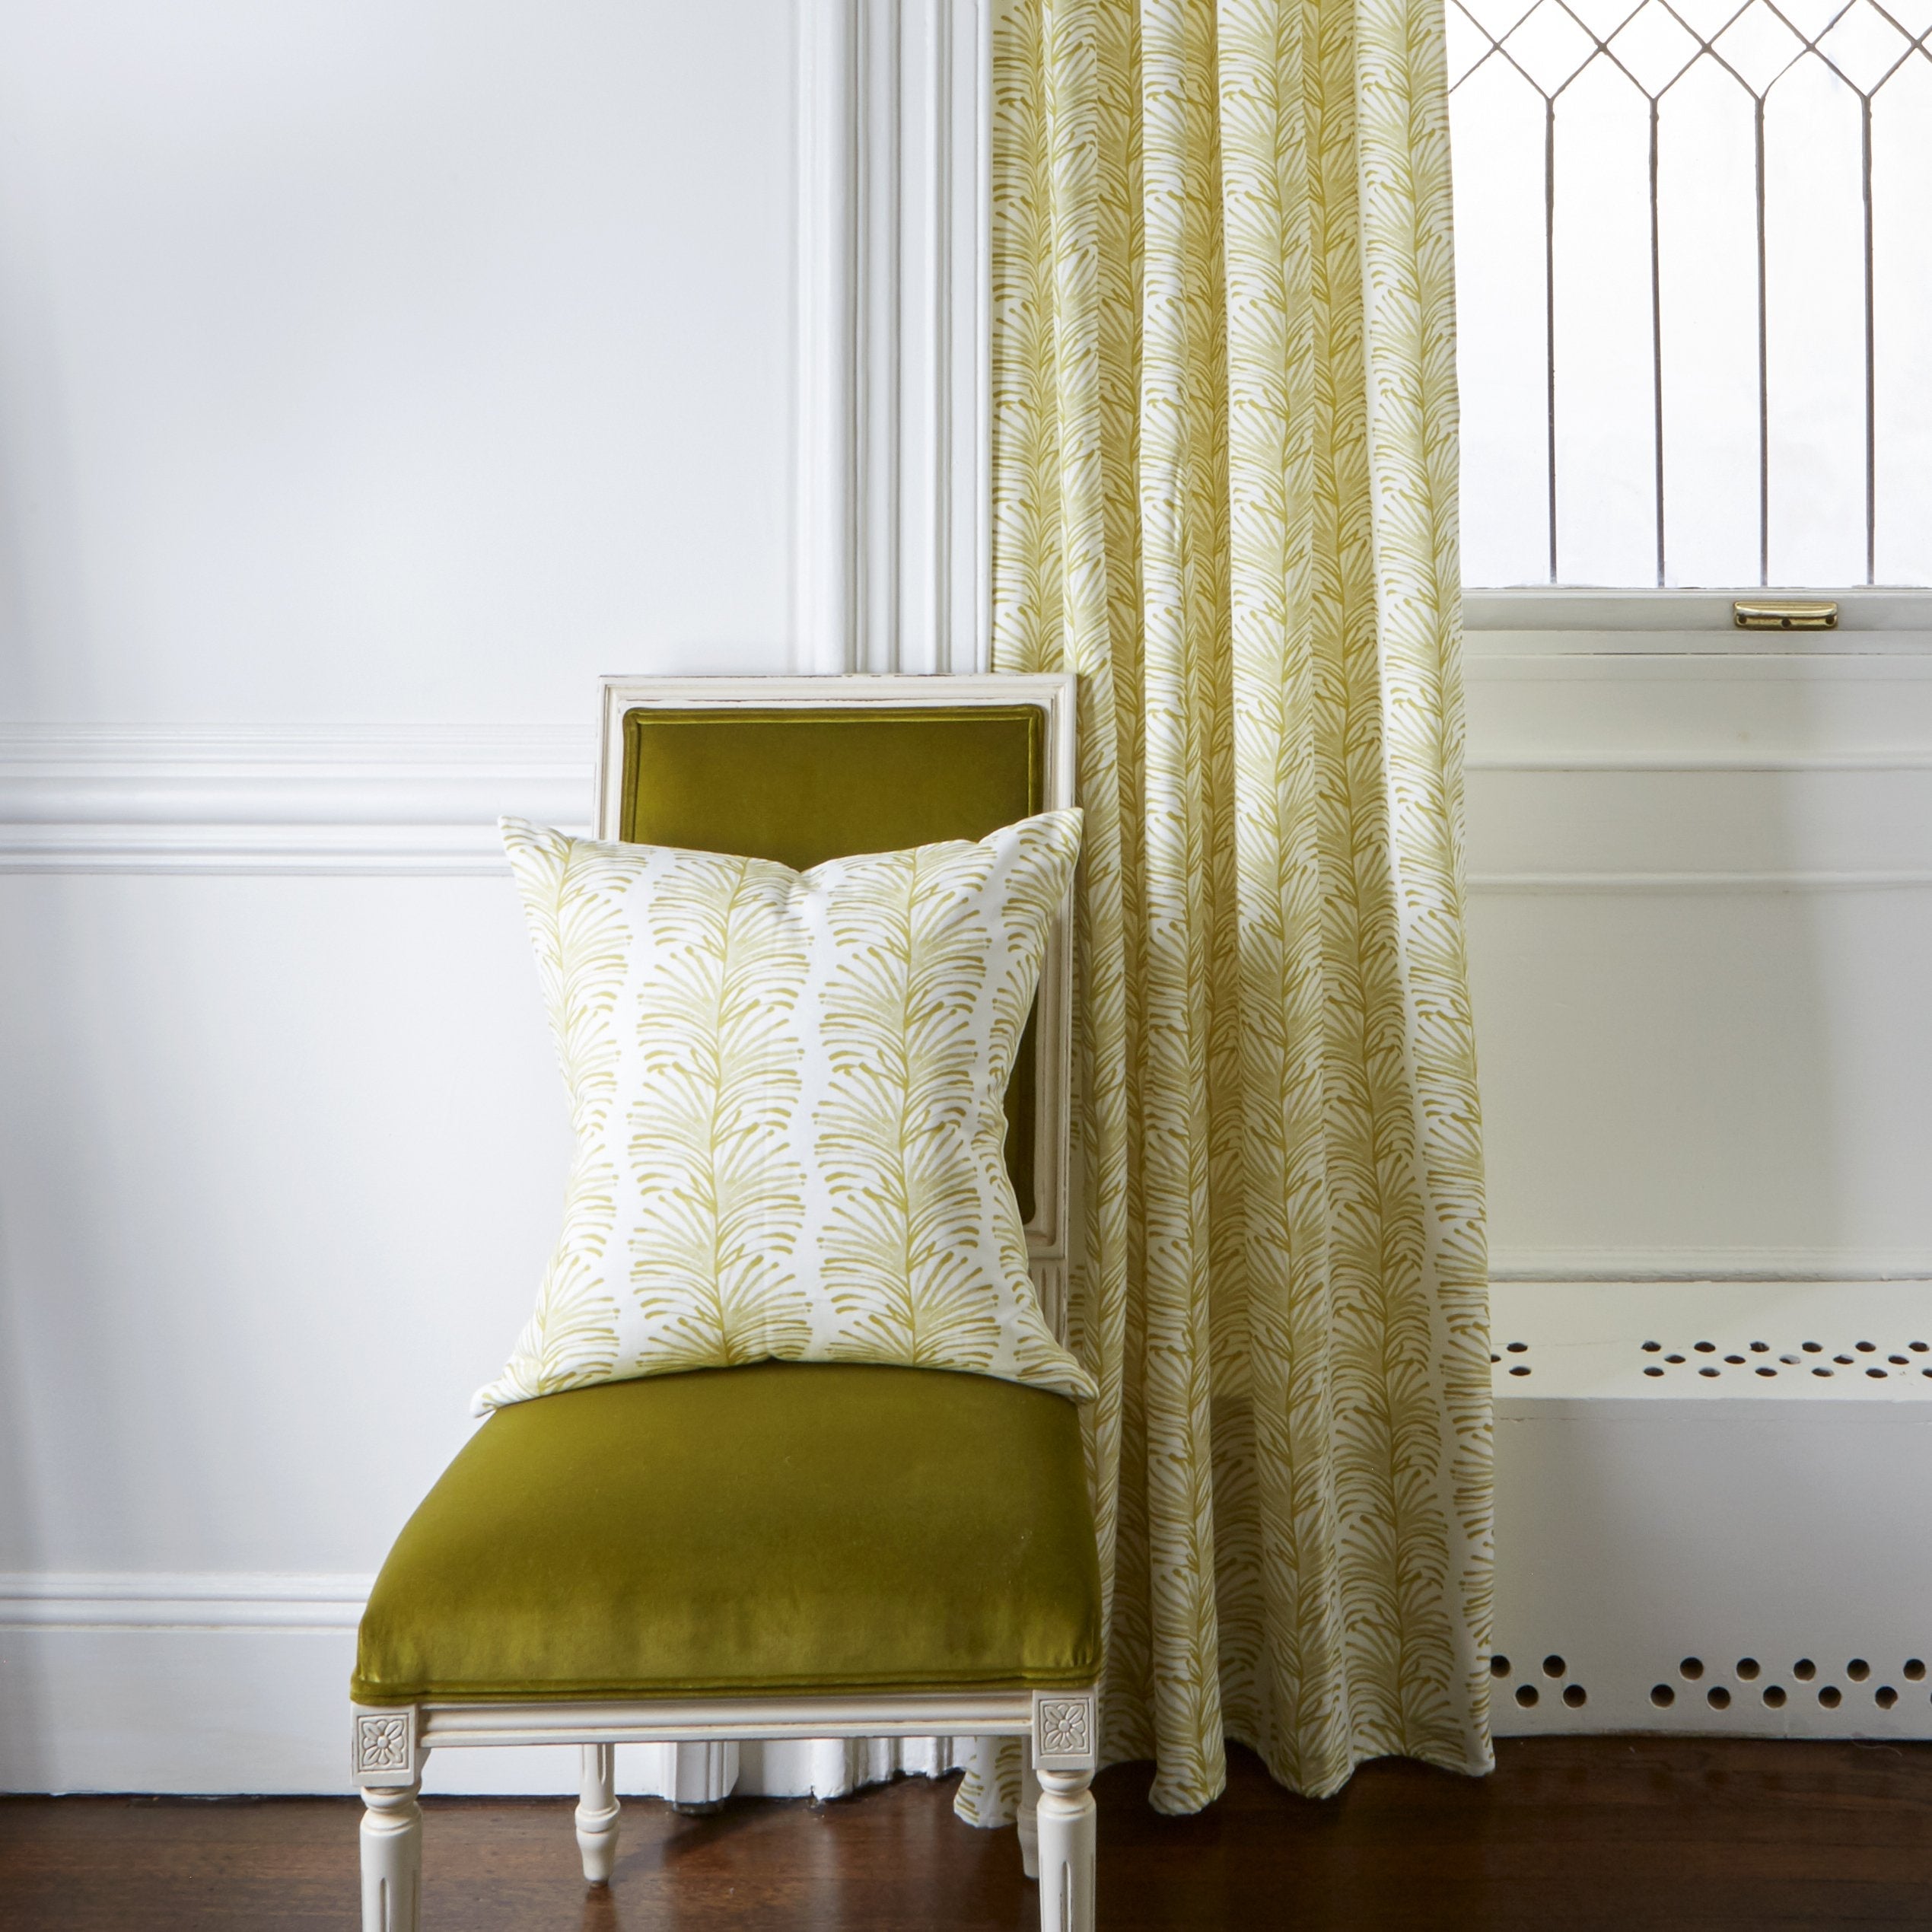 Yellow Stripe Chartreuse Pillow on Mustard Yellow Velvet Chair next to Yellow Stripe Chartreuse Printed Curtain by window